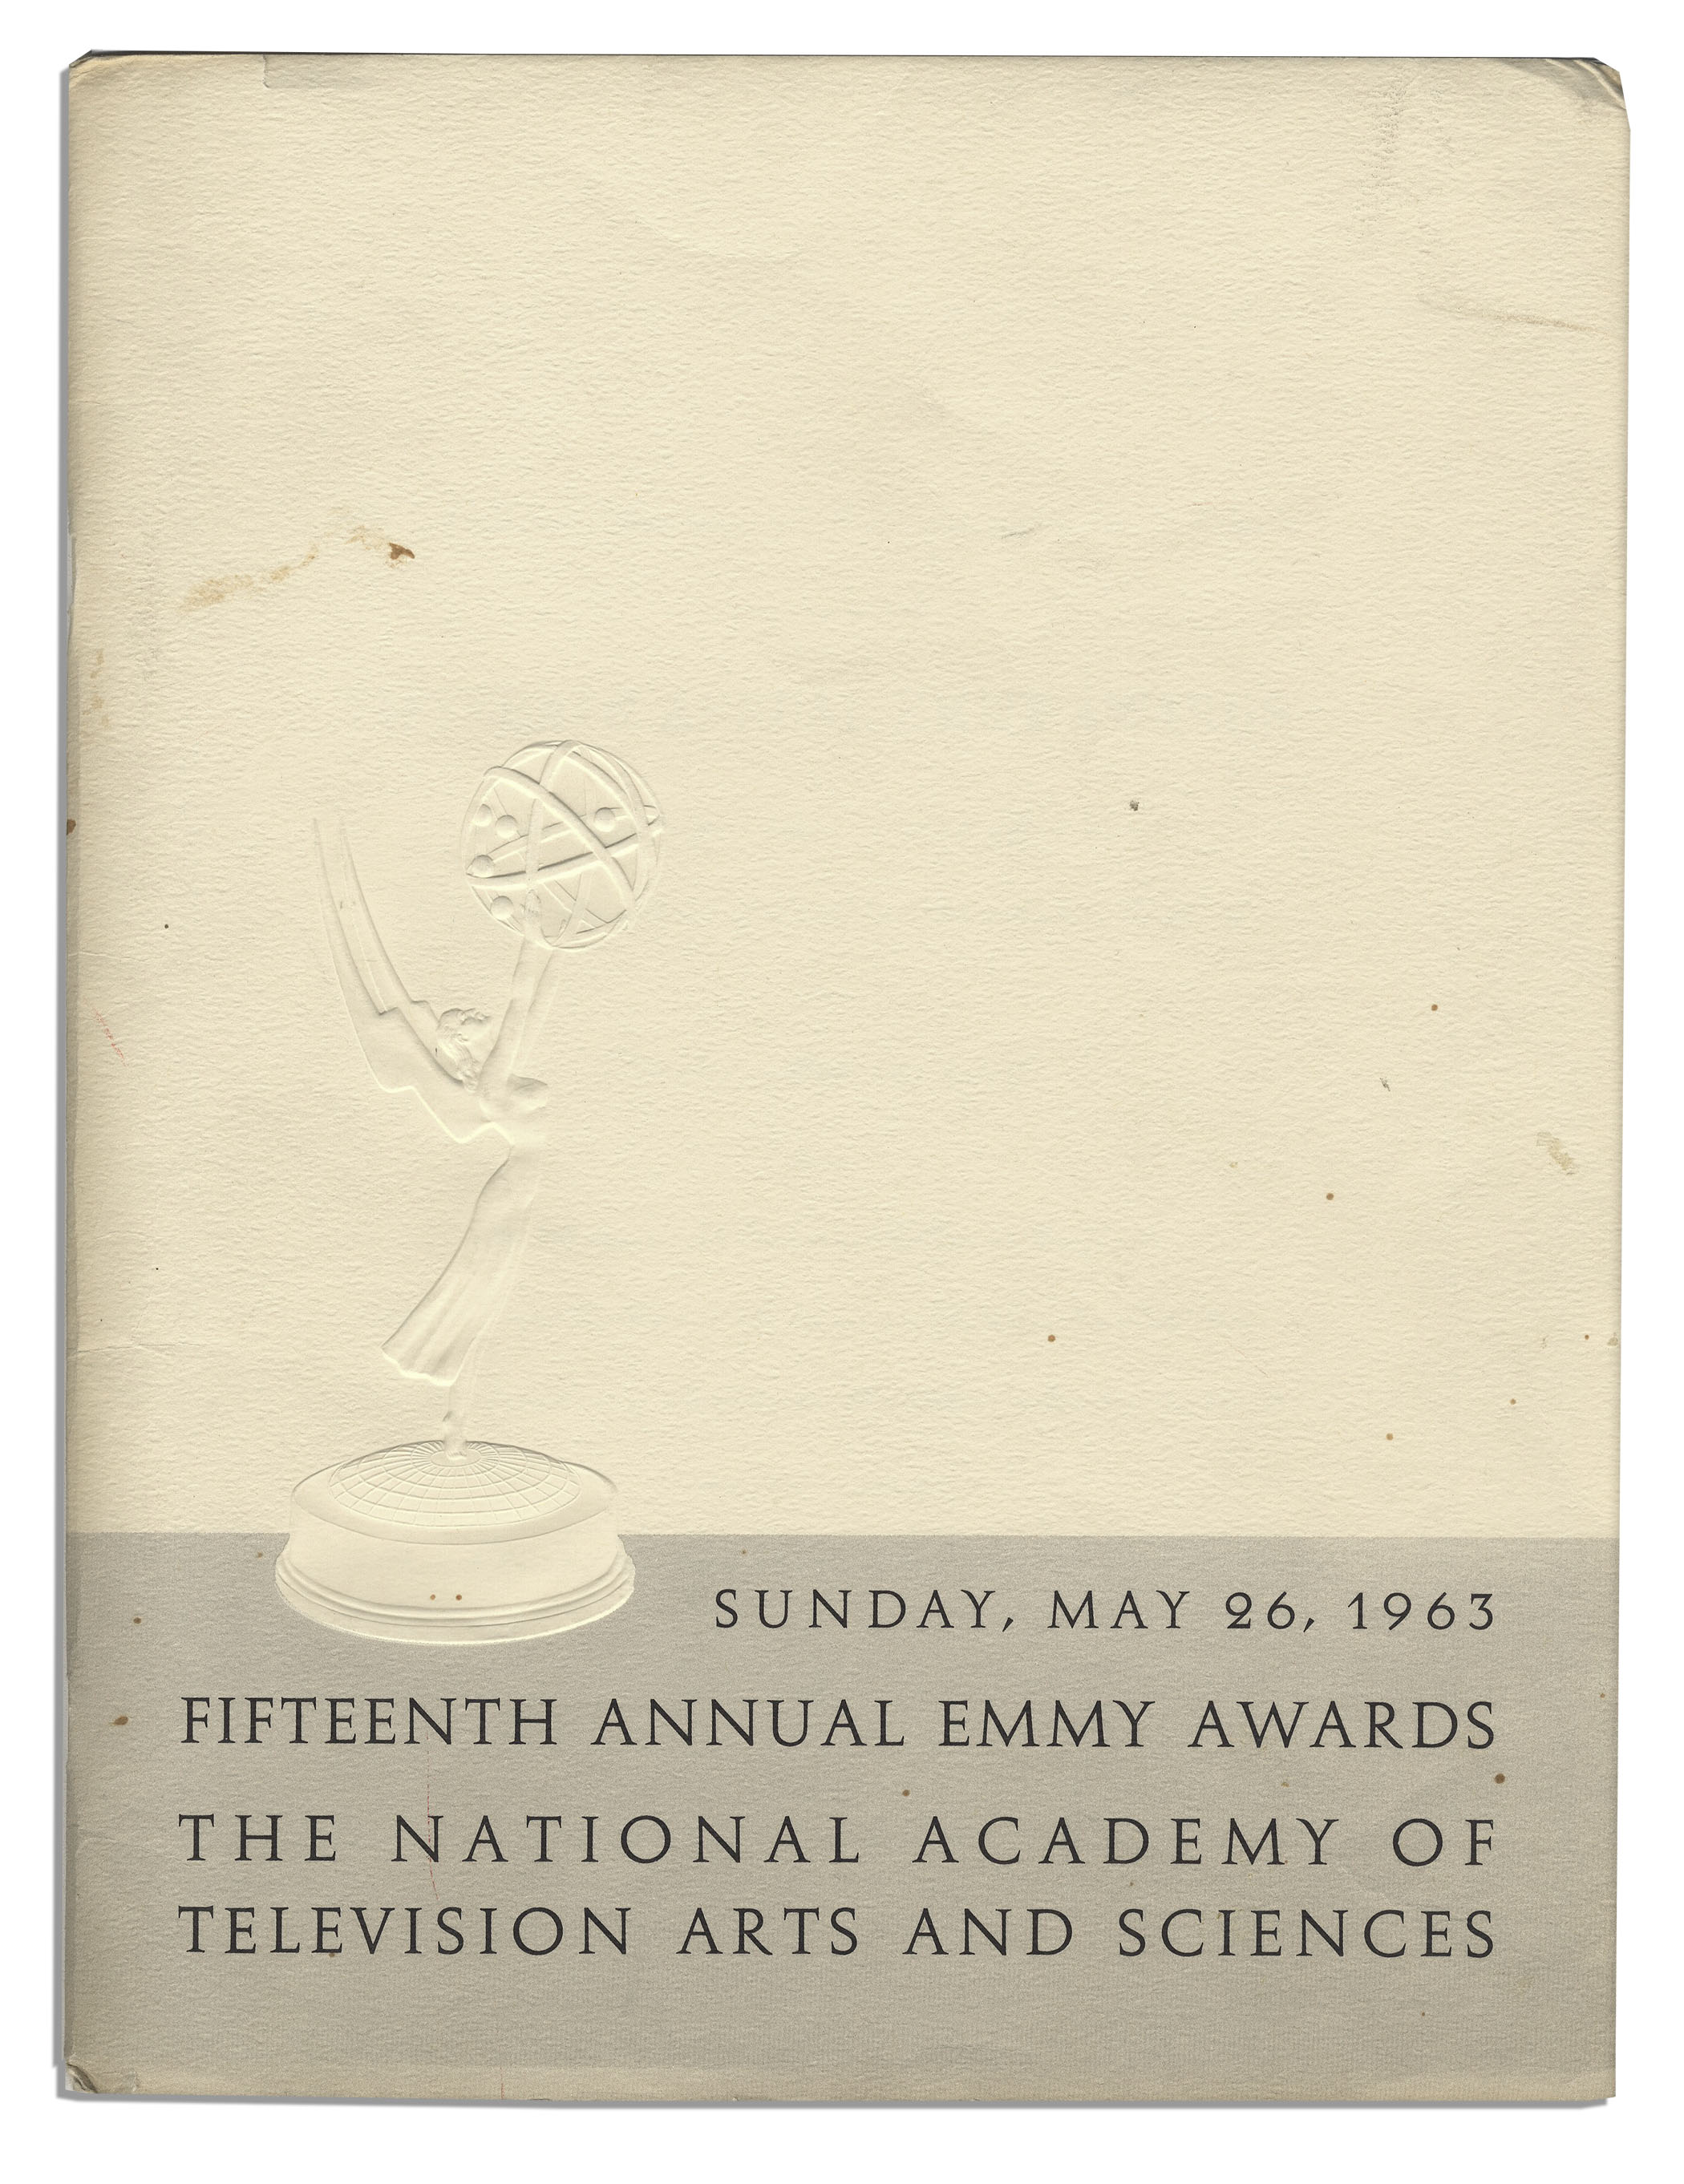 Emmy Awards program from the 15th annual ceremony in 1963. NATAS program cover features an - Image 3 of 3